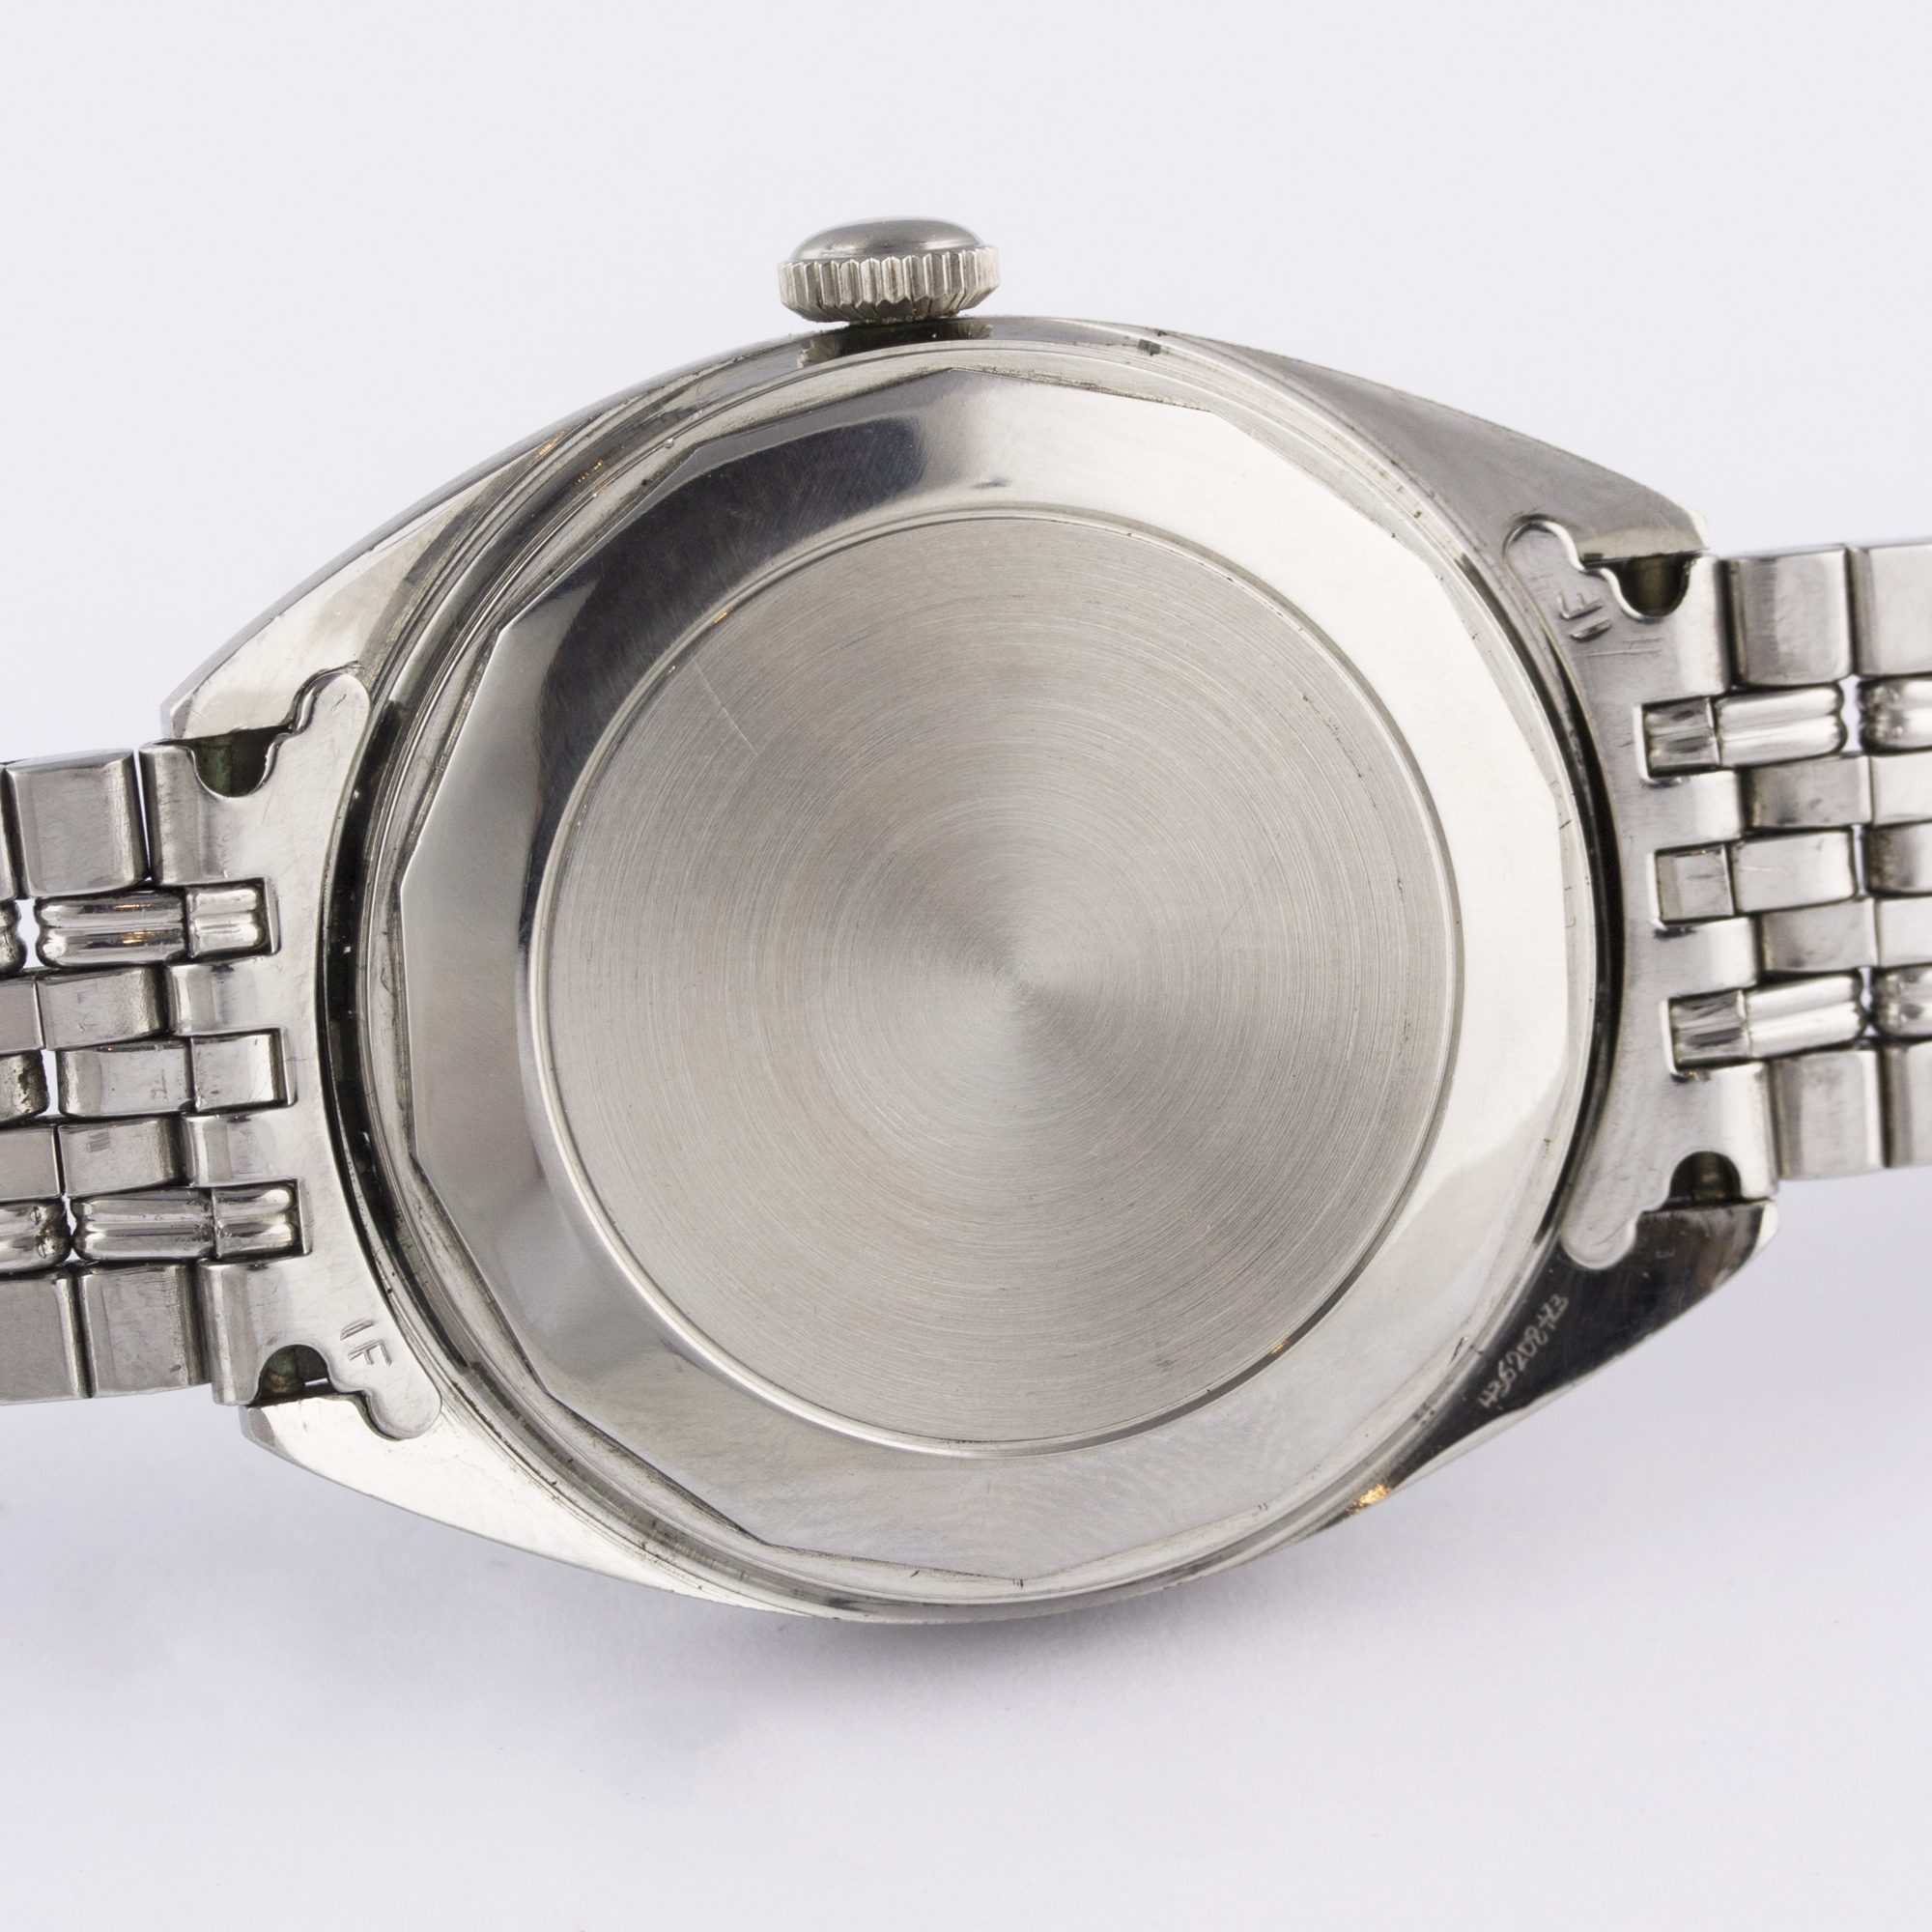 A RARE GENTLEMAN'S STAINLESS STEEL IWC YACHT CLUB AUTOMATIC BRACELET WATCH CIRCA 1971, REF. R811 - Image 7 of 11